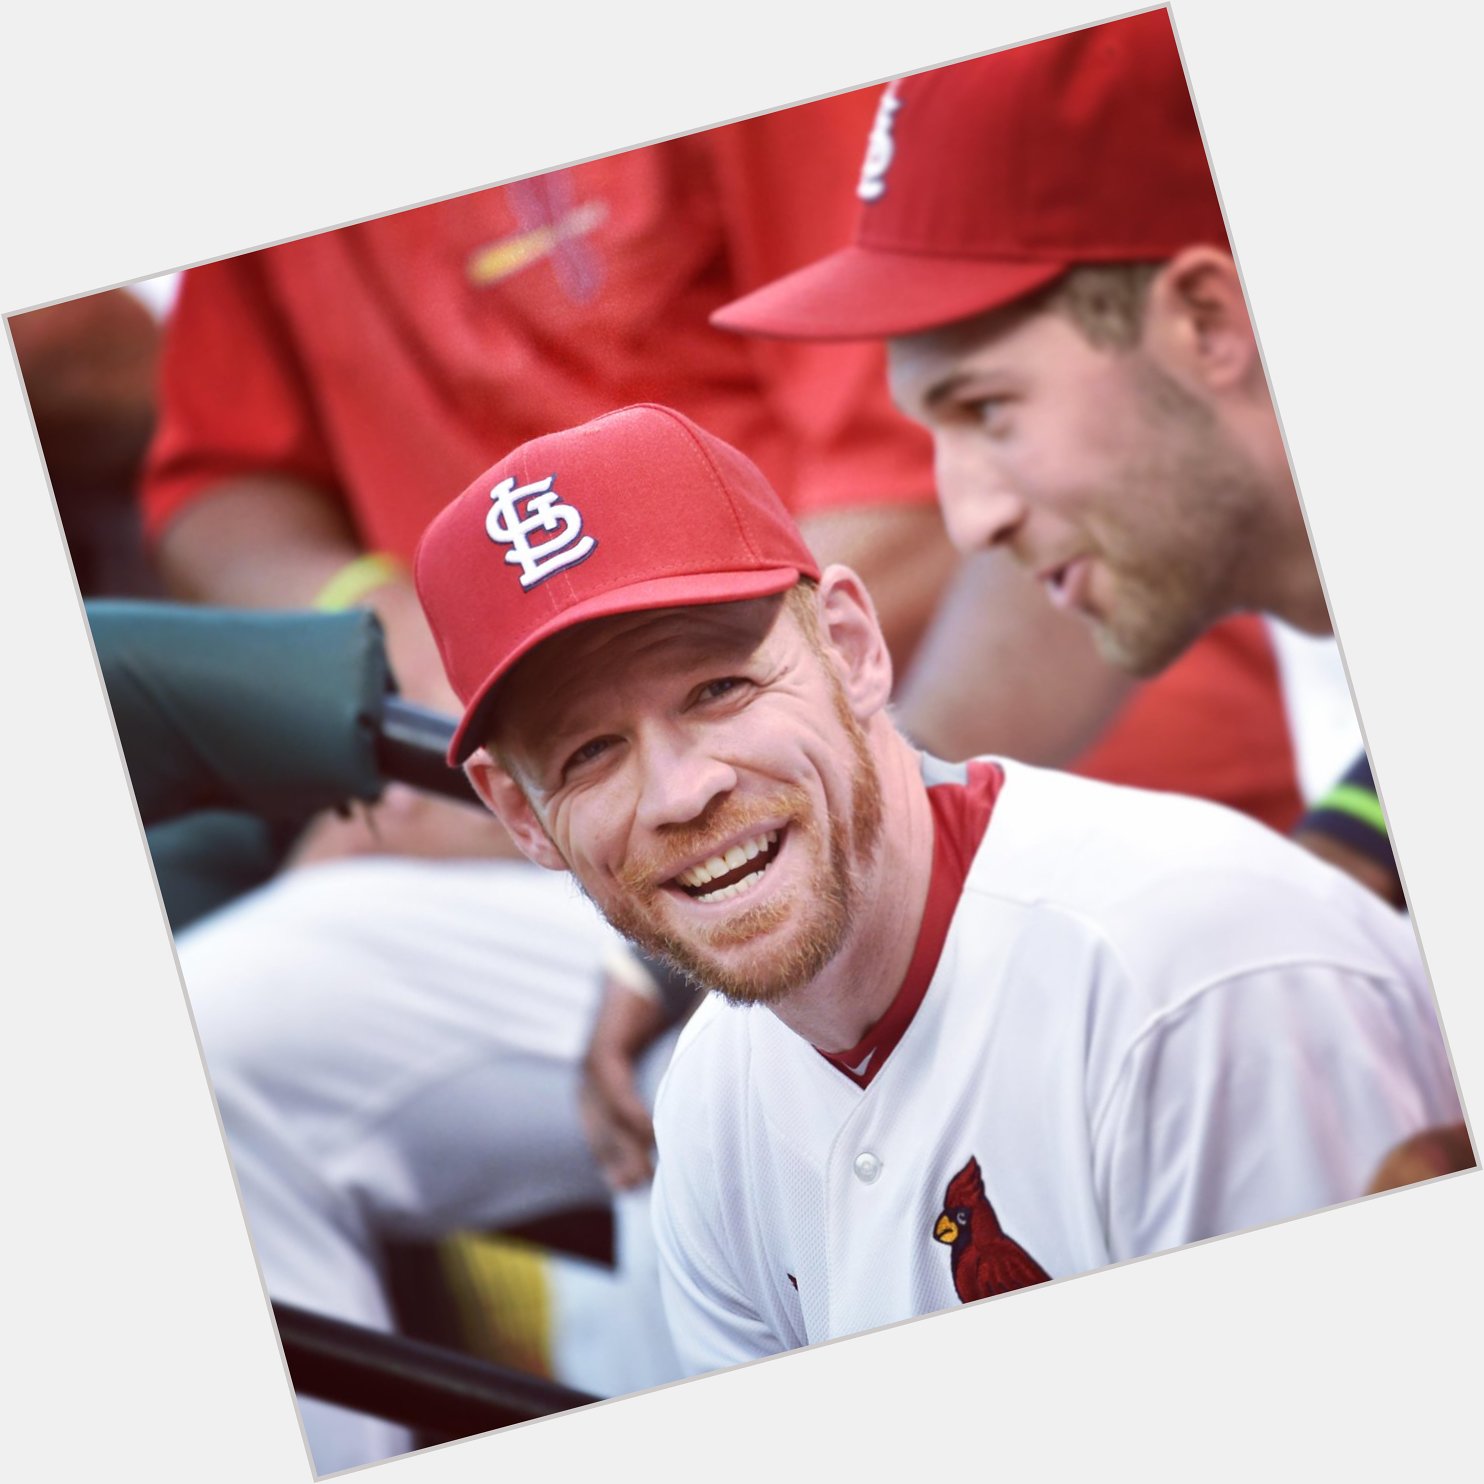 Join us in wishing a Happy 32nd Birthday to infielder Brandon Moss! 